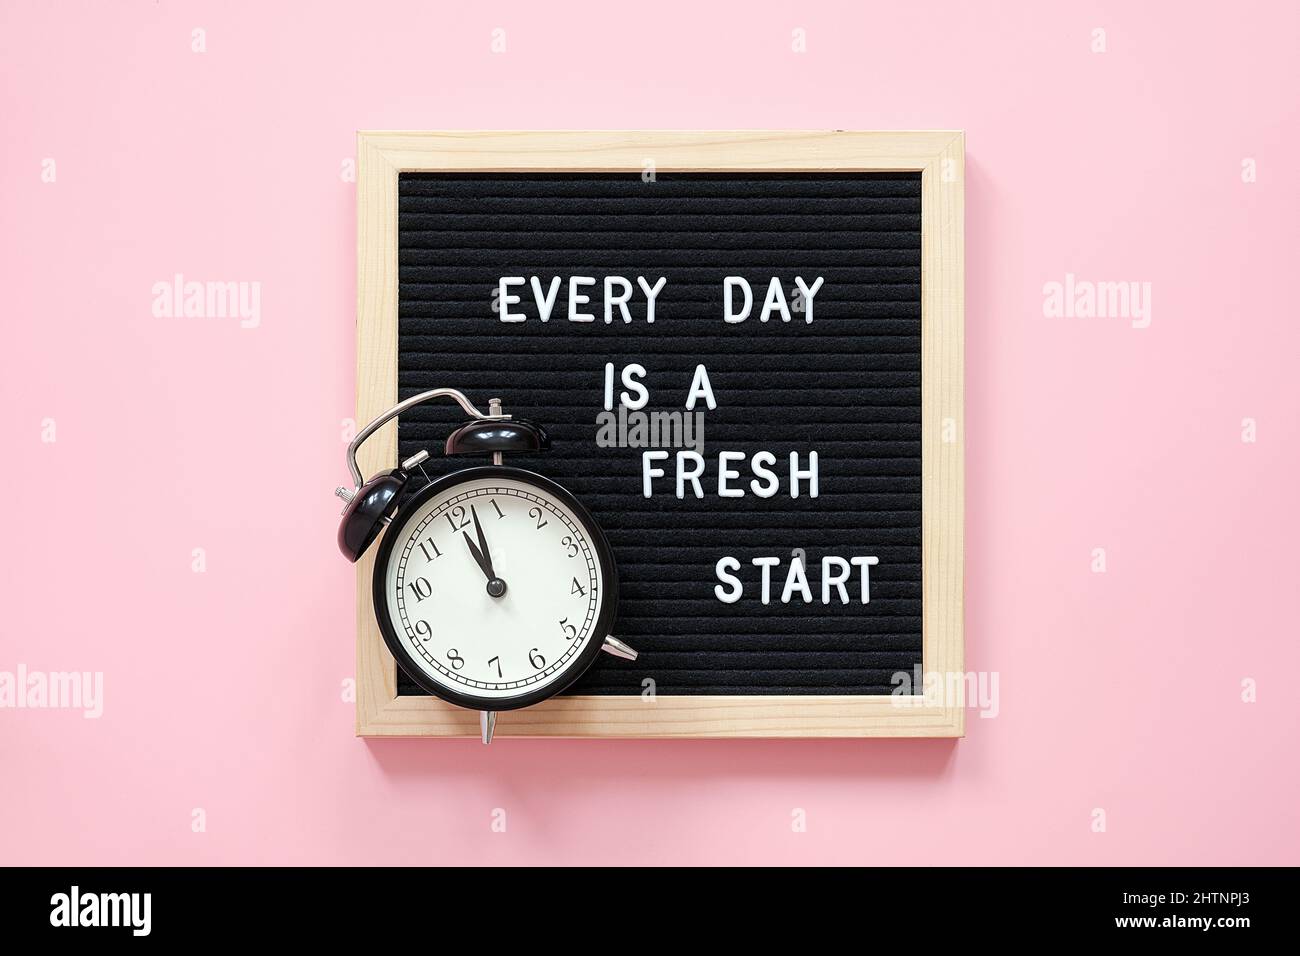 Every day is a fresh start. Motivational quote on black letter board and black alarm clock on pink background. Concept inspirational quote of the day. Stock Photo